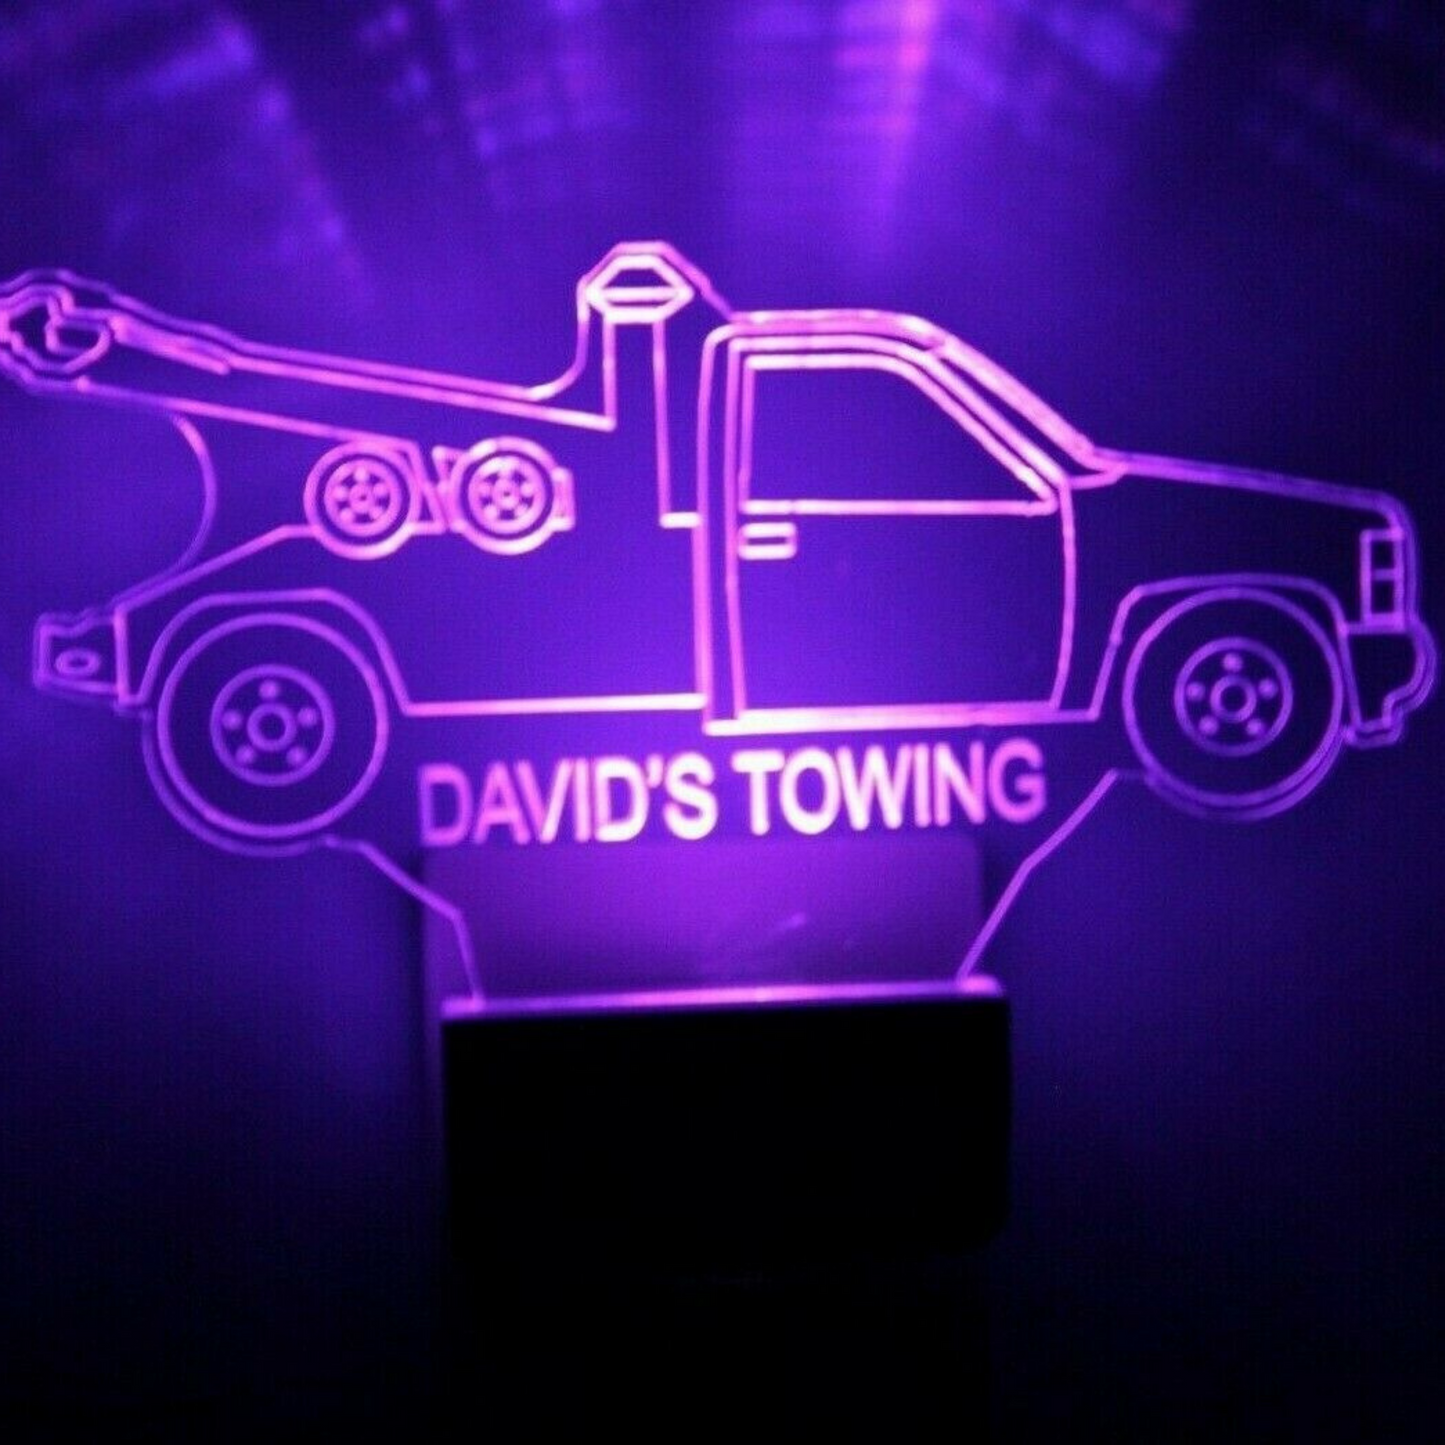 Tow Truck Wrecker Night Light Multi Color Personalized LED Wall Plug-in Cool-Touch Smart Dusk to Dawn Sensor